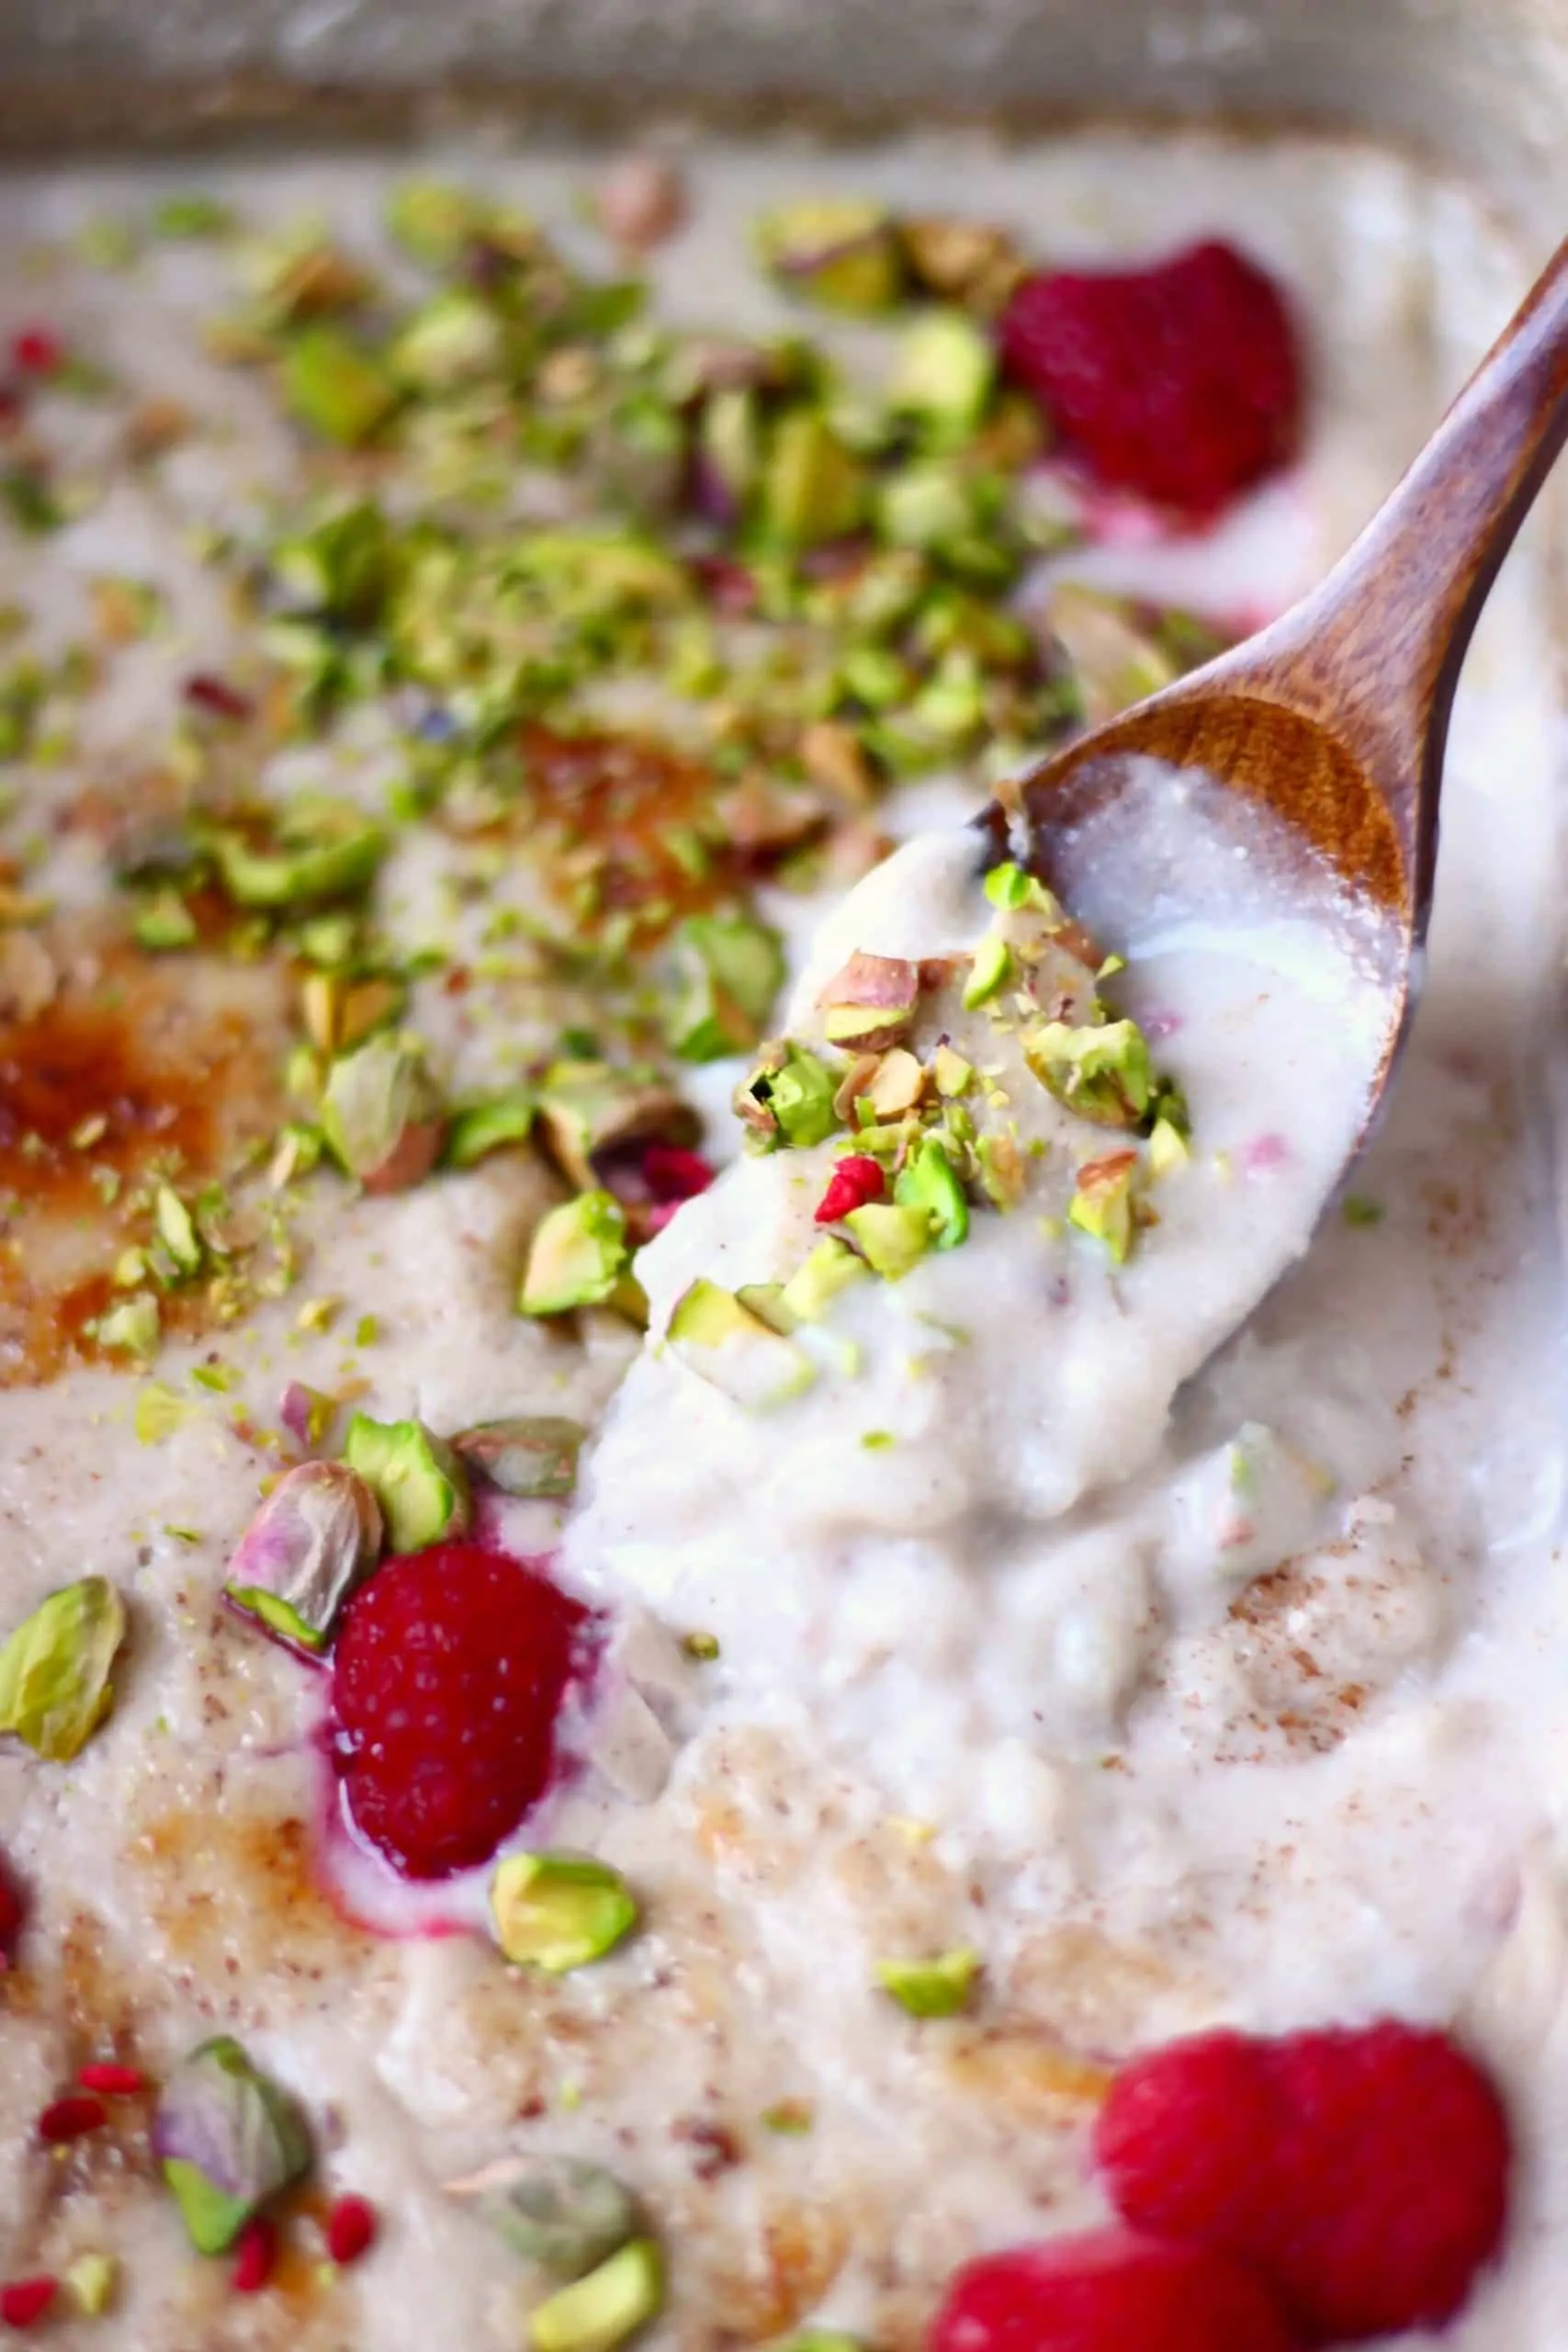 Rice pudding in a rectangular baking dish topped with raspberries and chopped pistachios with a spoon lifting up a mouthful of it